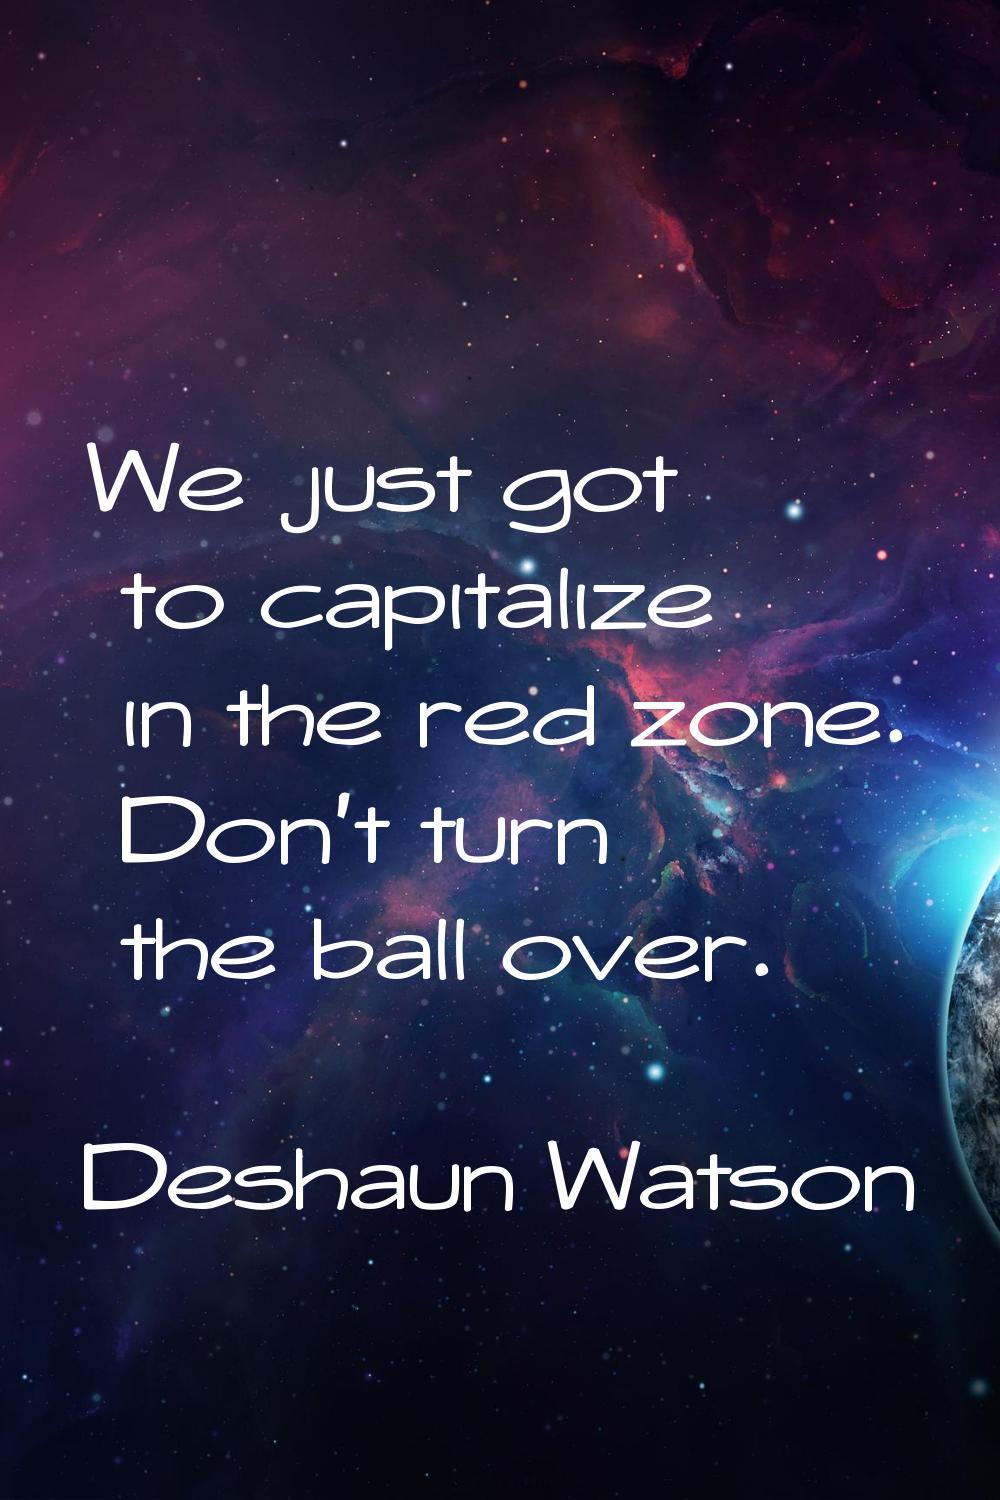 We just got to capitalize in the red zone. Don't turn the ball over.